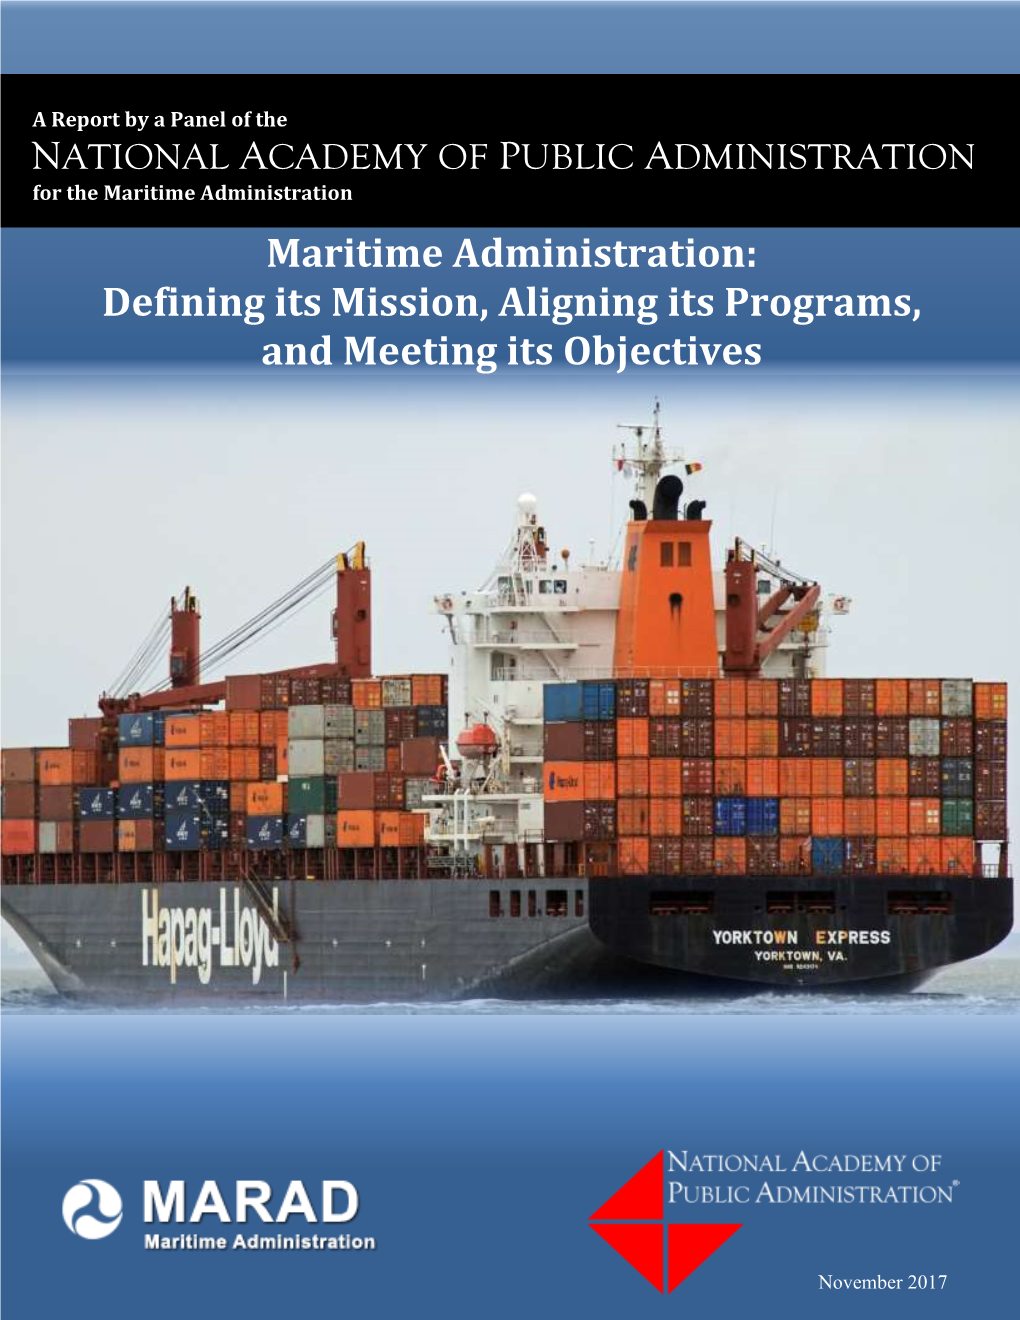 Maritime Administration: Defining Its Mission, Aligning Its Programs, and Meeting Its Objectives